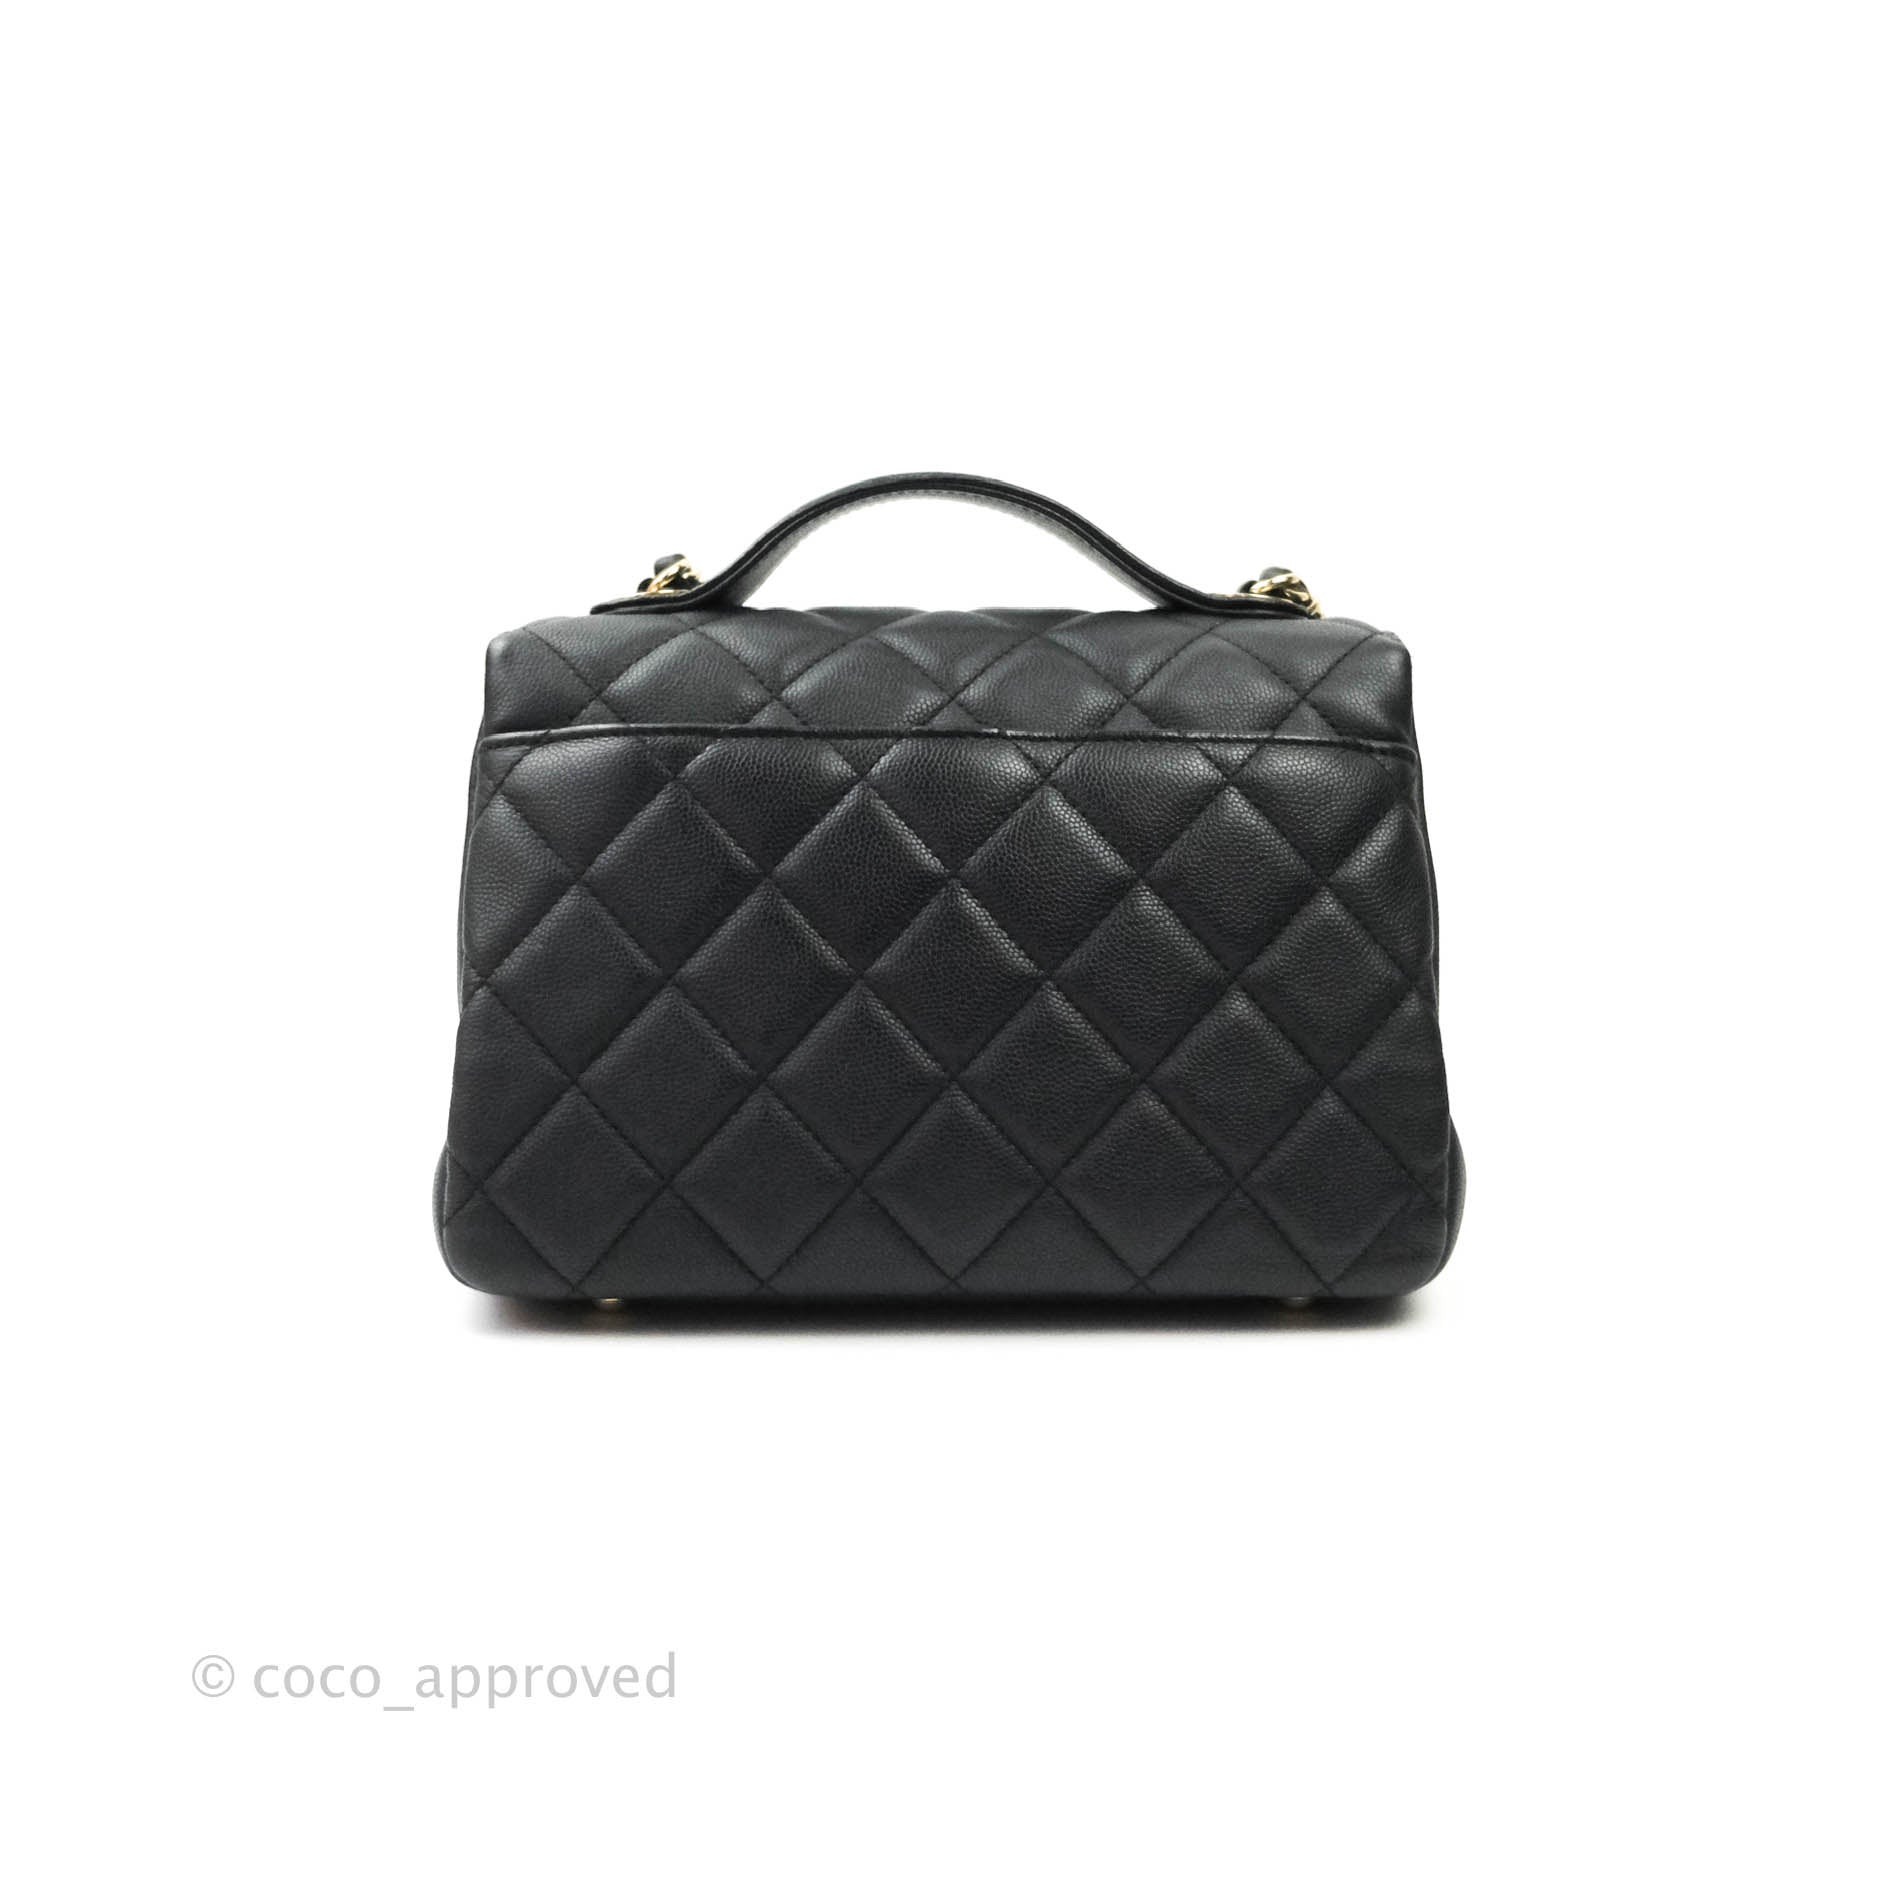 Chanel Business Affinity Large Shopping Tote in Black Caviar with Pale Gold  Hardware - SOLD